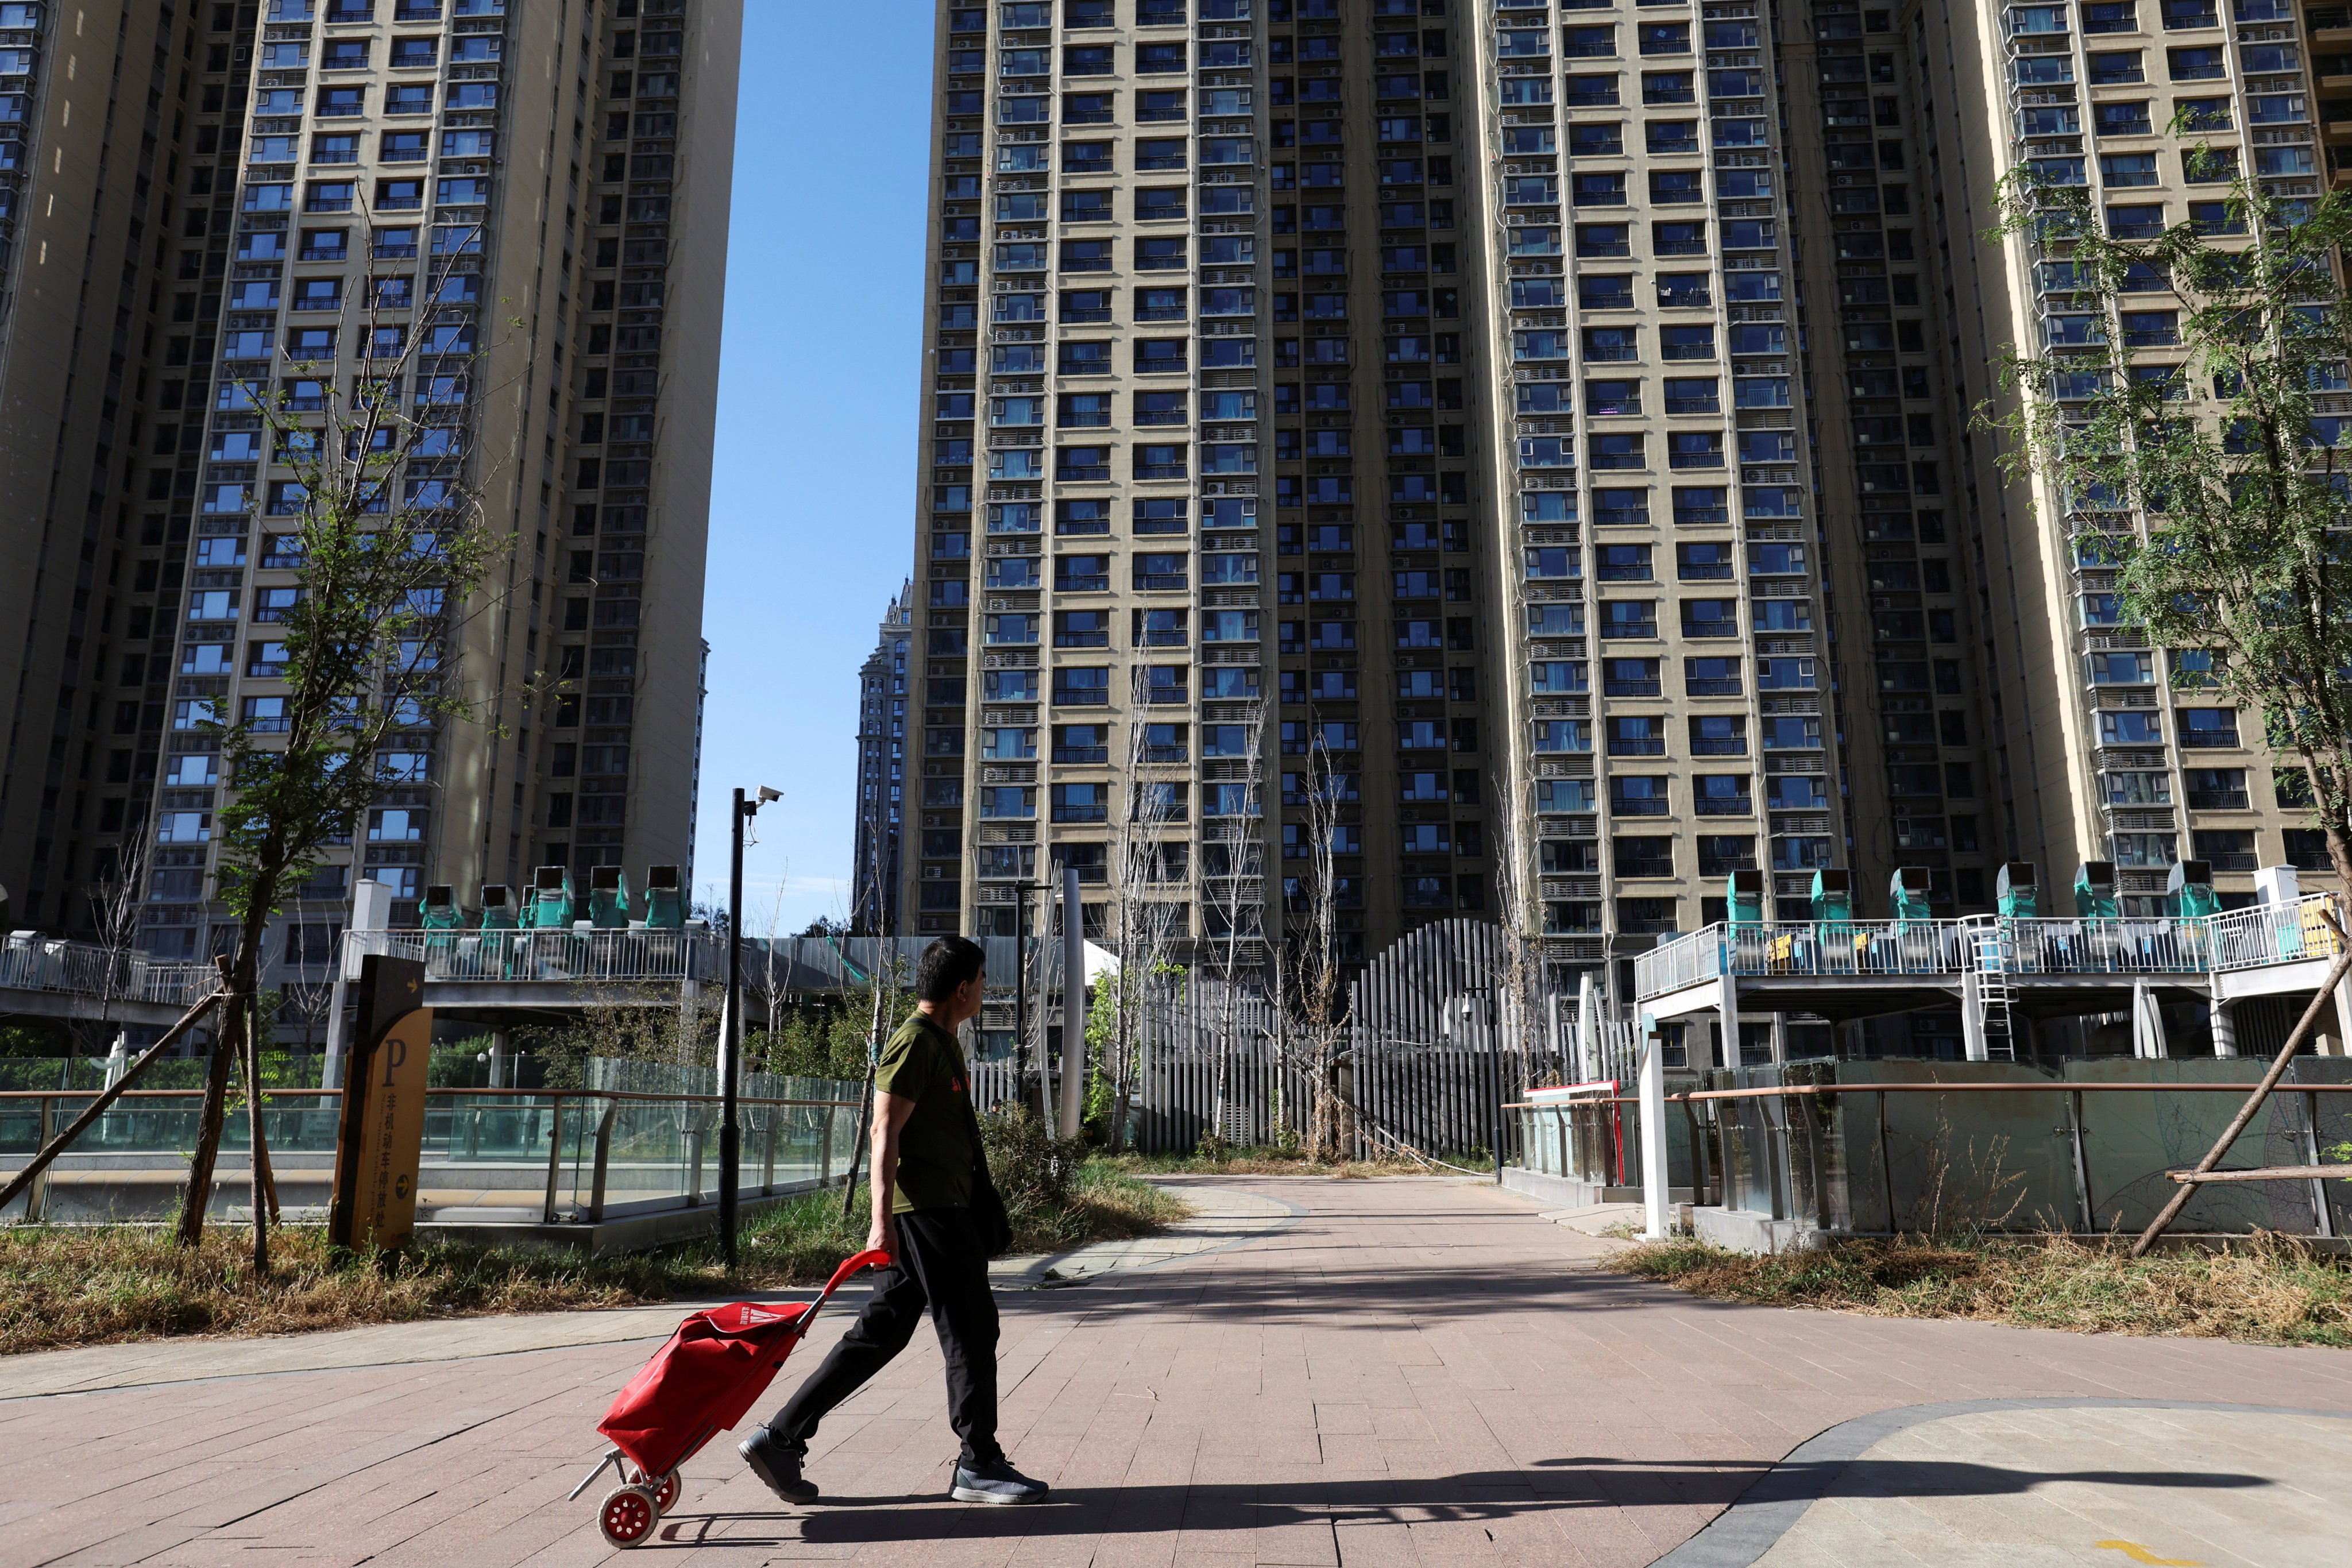 ‘We expect the benefit to housing demand from recent supportive policies will be short-lived,’ says Moody’s in its report. Photo: Reuters